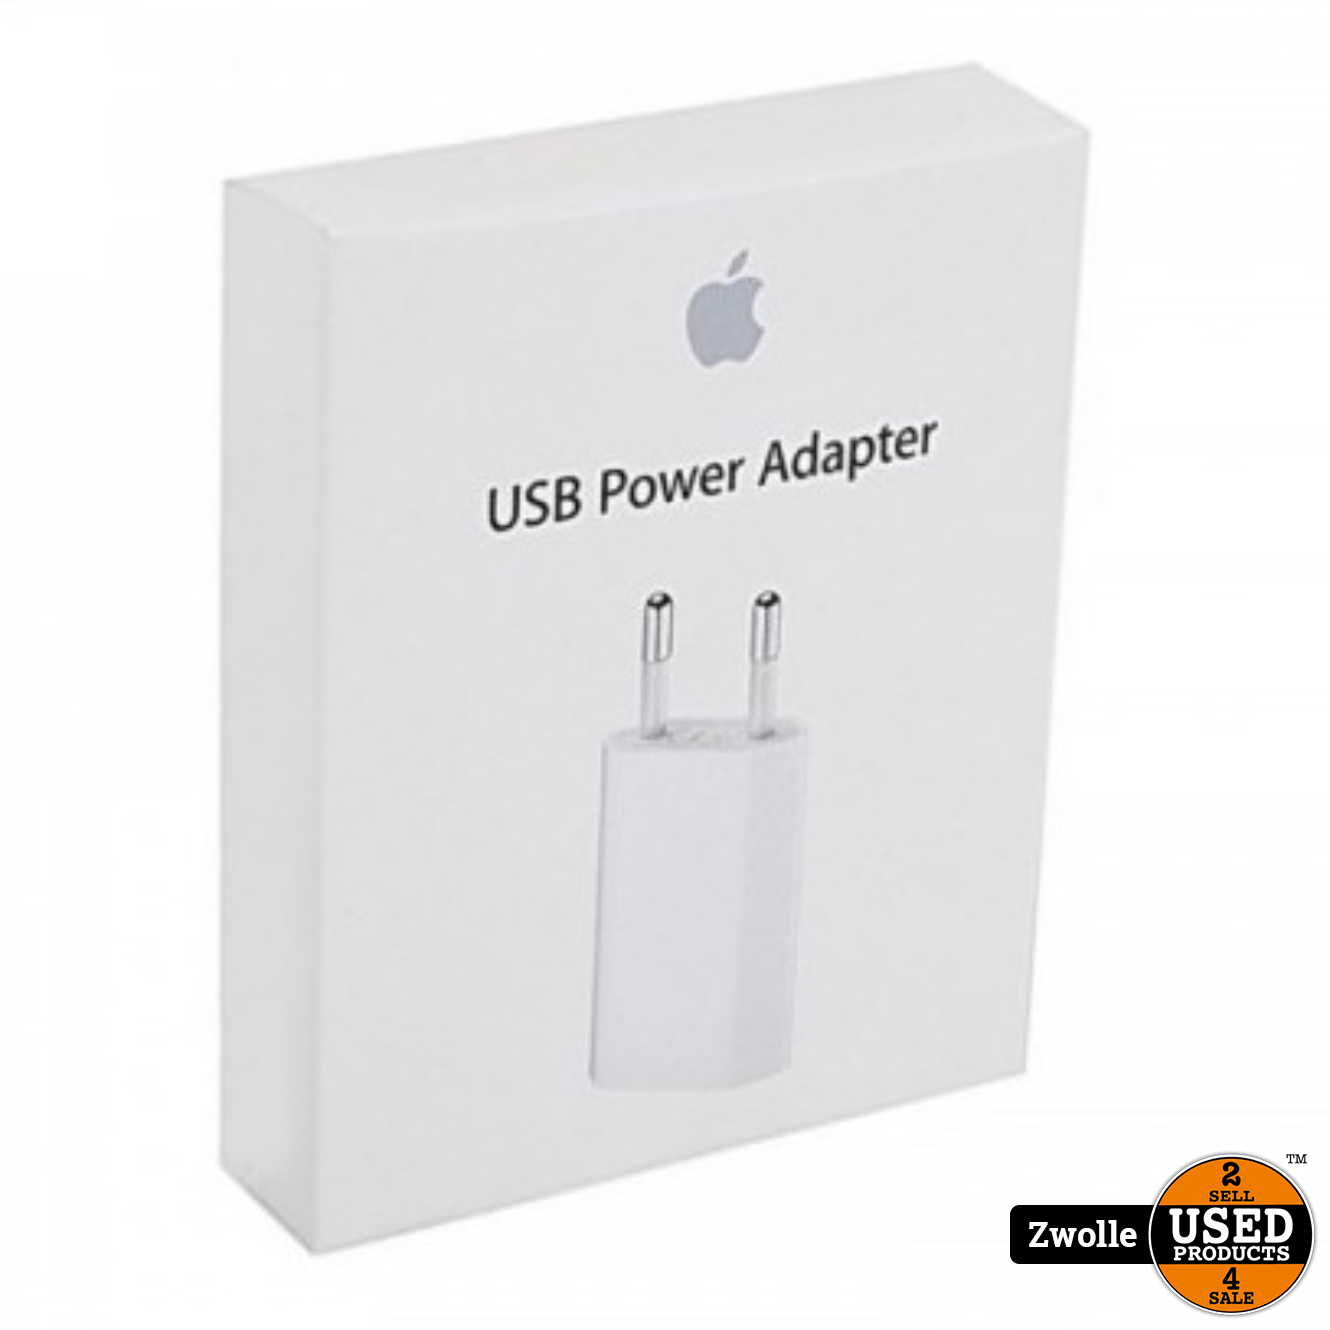 jeans Europa Artiest Apple iPhone USB Power Adapter 5W - Used Products Zwolle